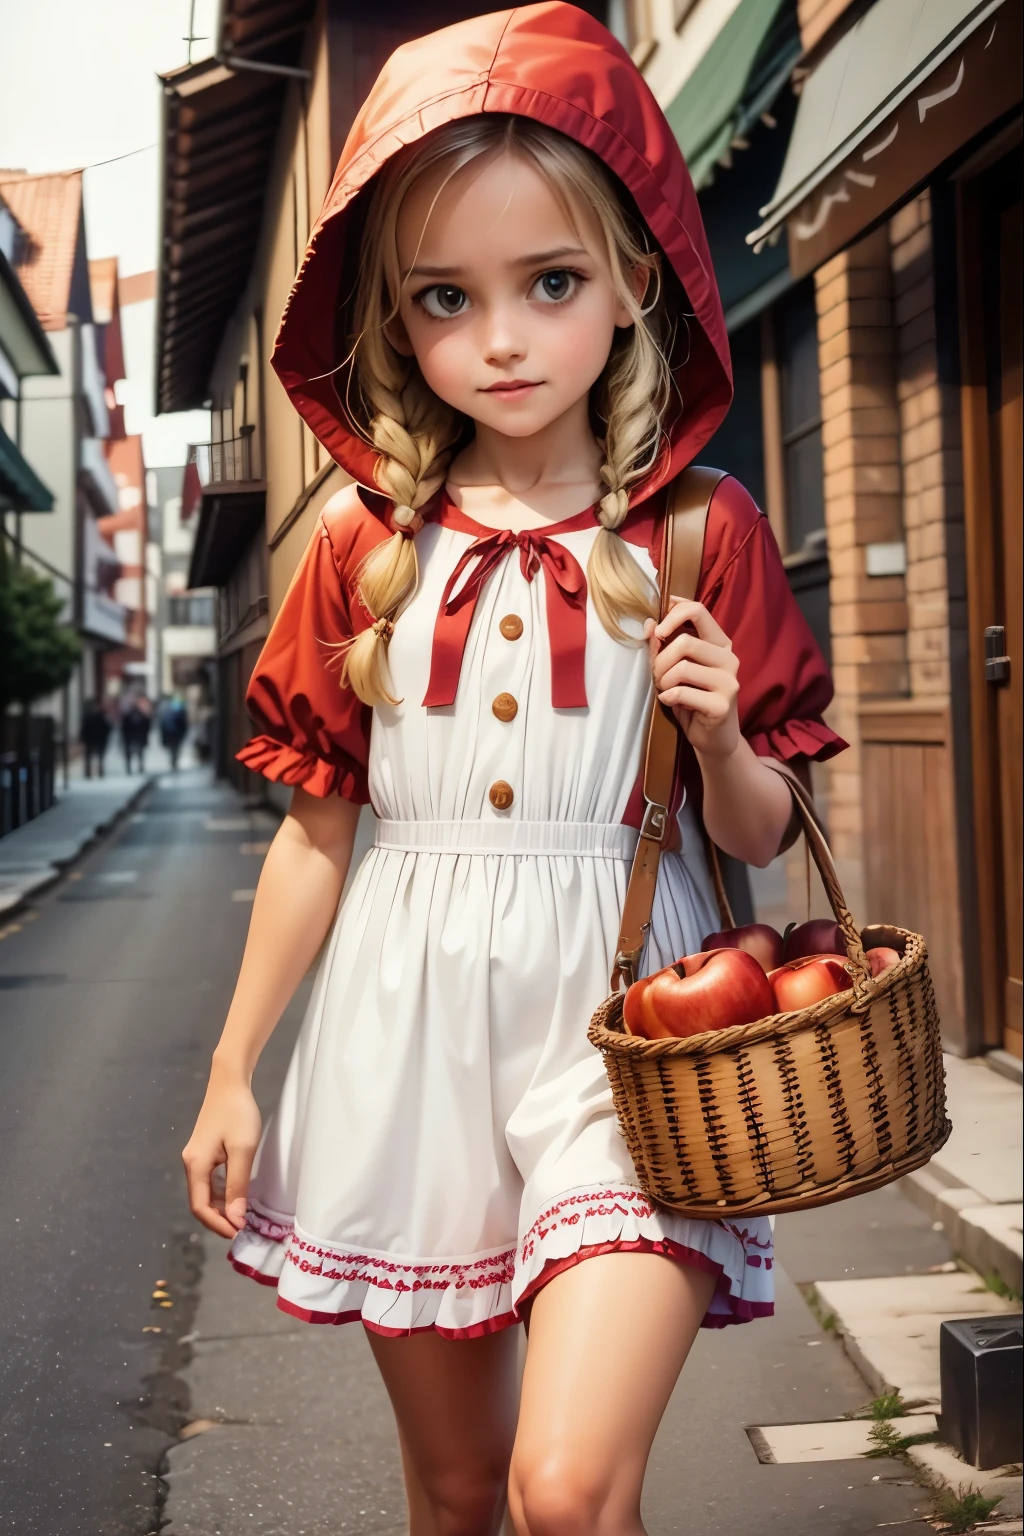 Girl dressed to go on an adventure、Dressed as Little Red Riding Hood、bustup、Walking while humming、Looks like a lot of fun、There is a basket with apple pie、Take low-angle shots